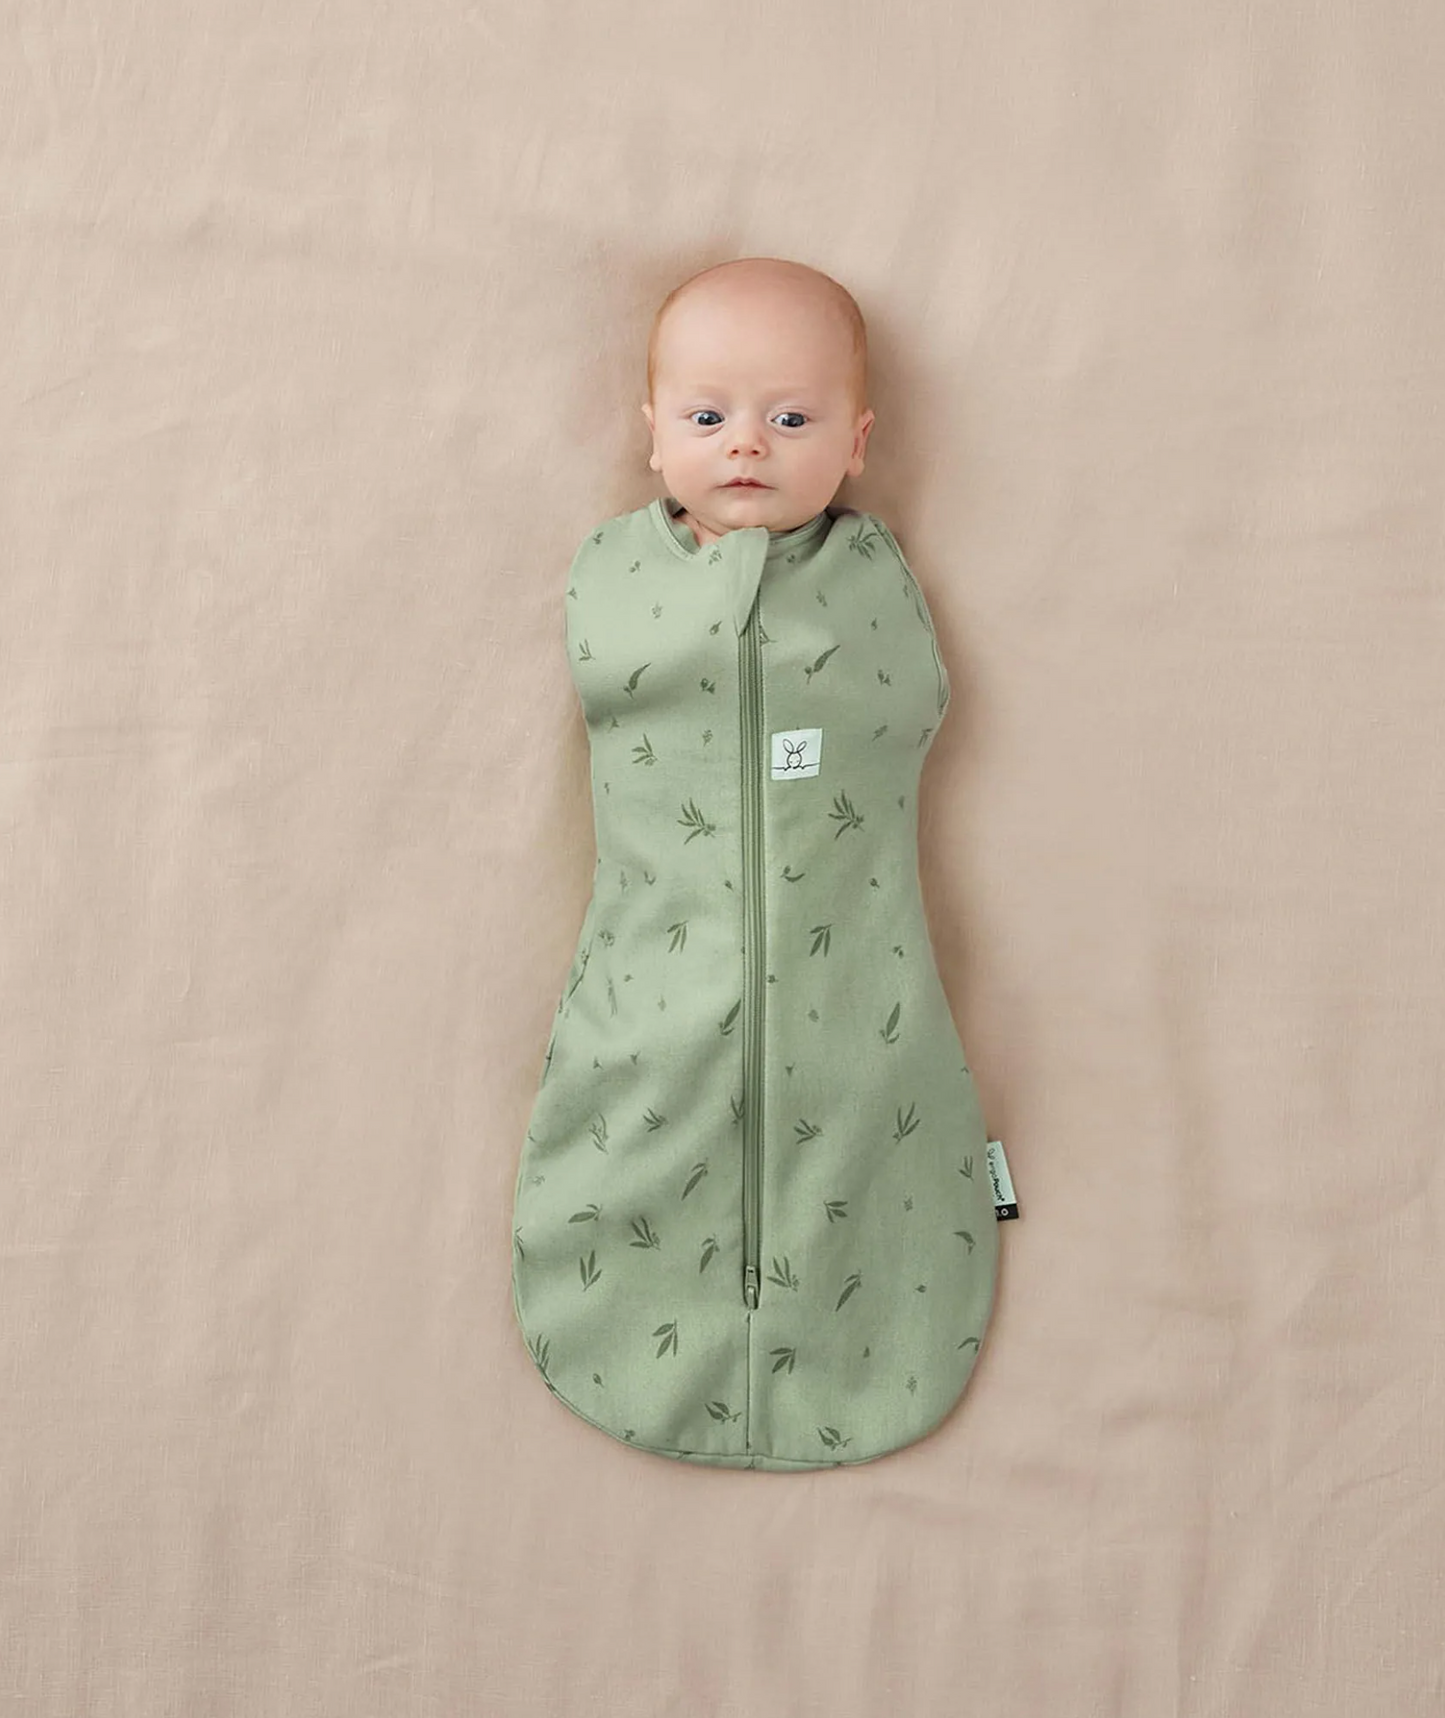 Willow Cocoon Swaddle Bag 1.0 TOG